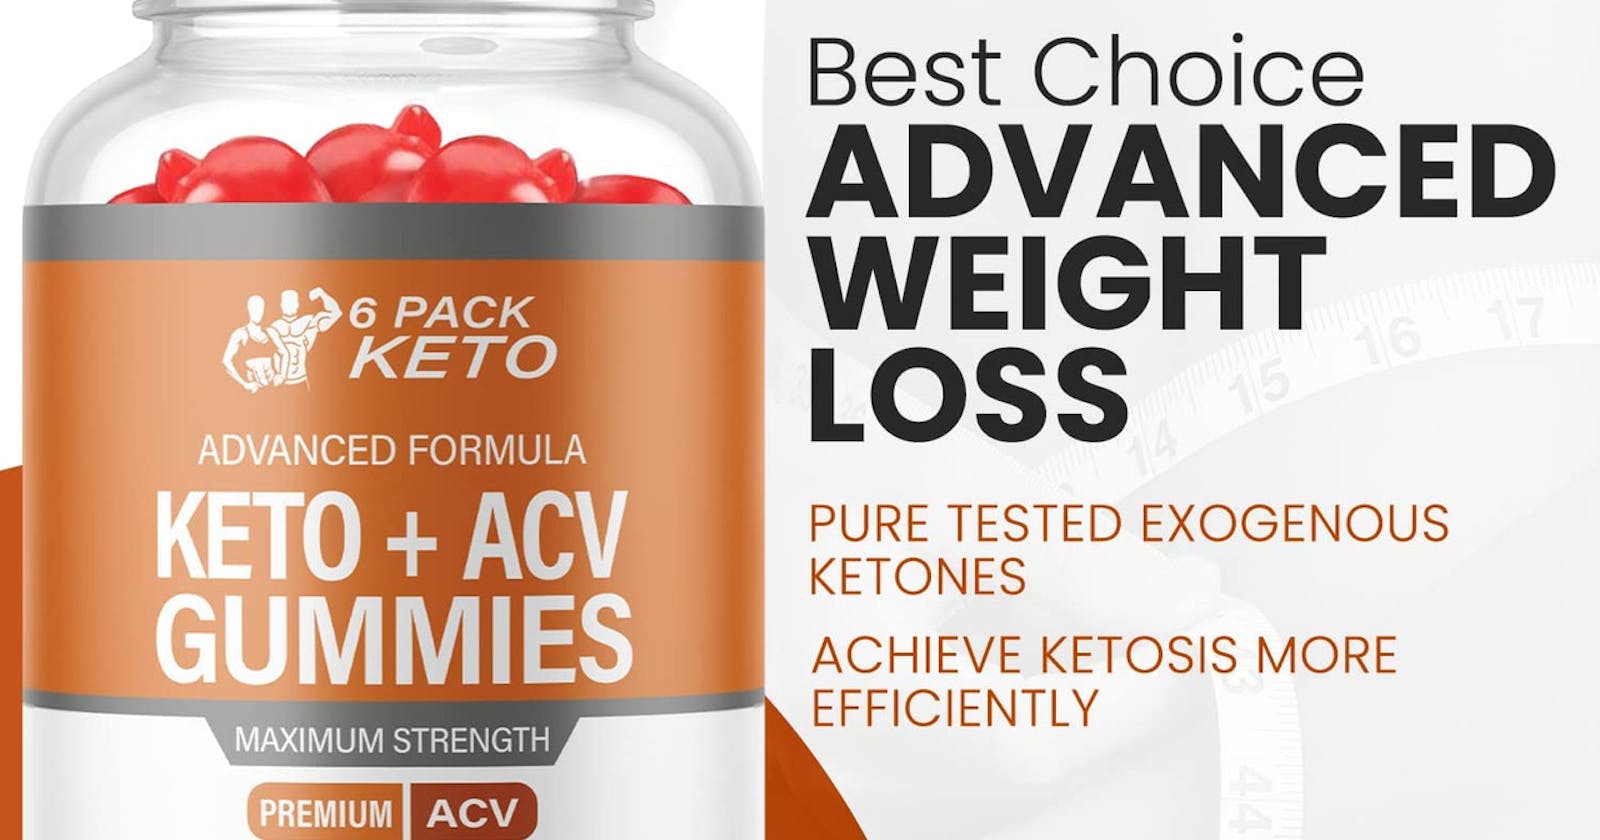 6 Pack Keto ACV Gummies Harmful Side Effects or Effective Ingredients? Resulting in Fraud or Safety?